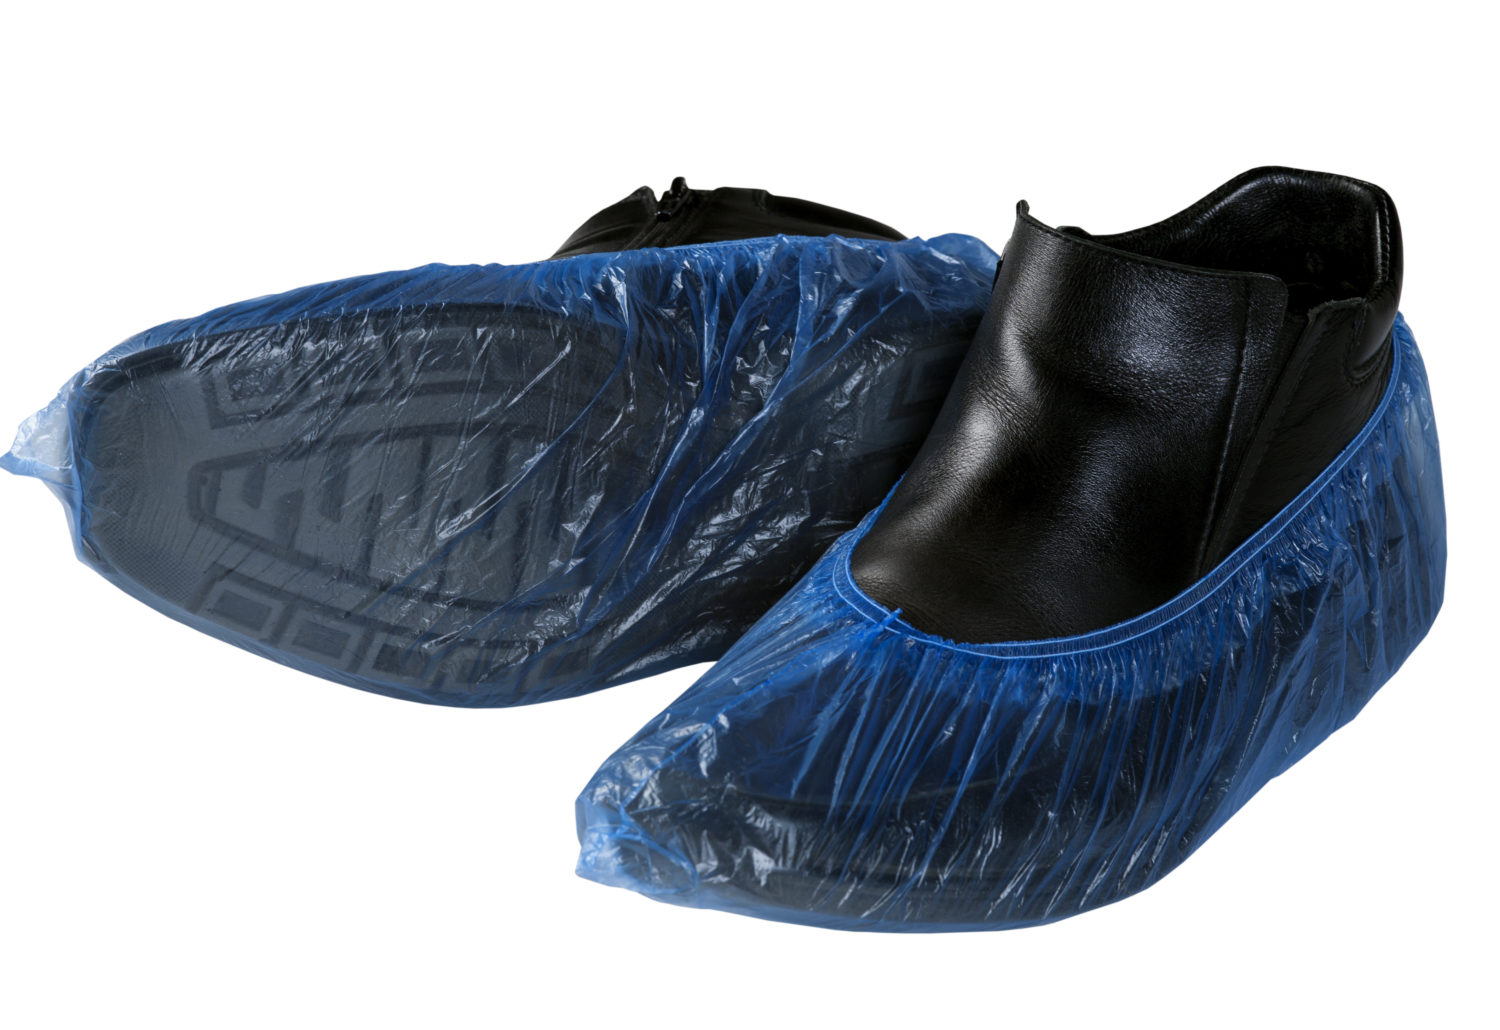 shoe covers for guests